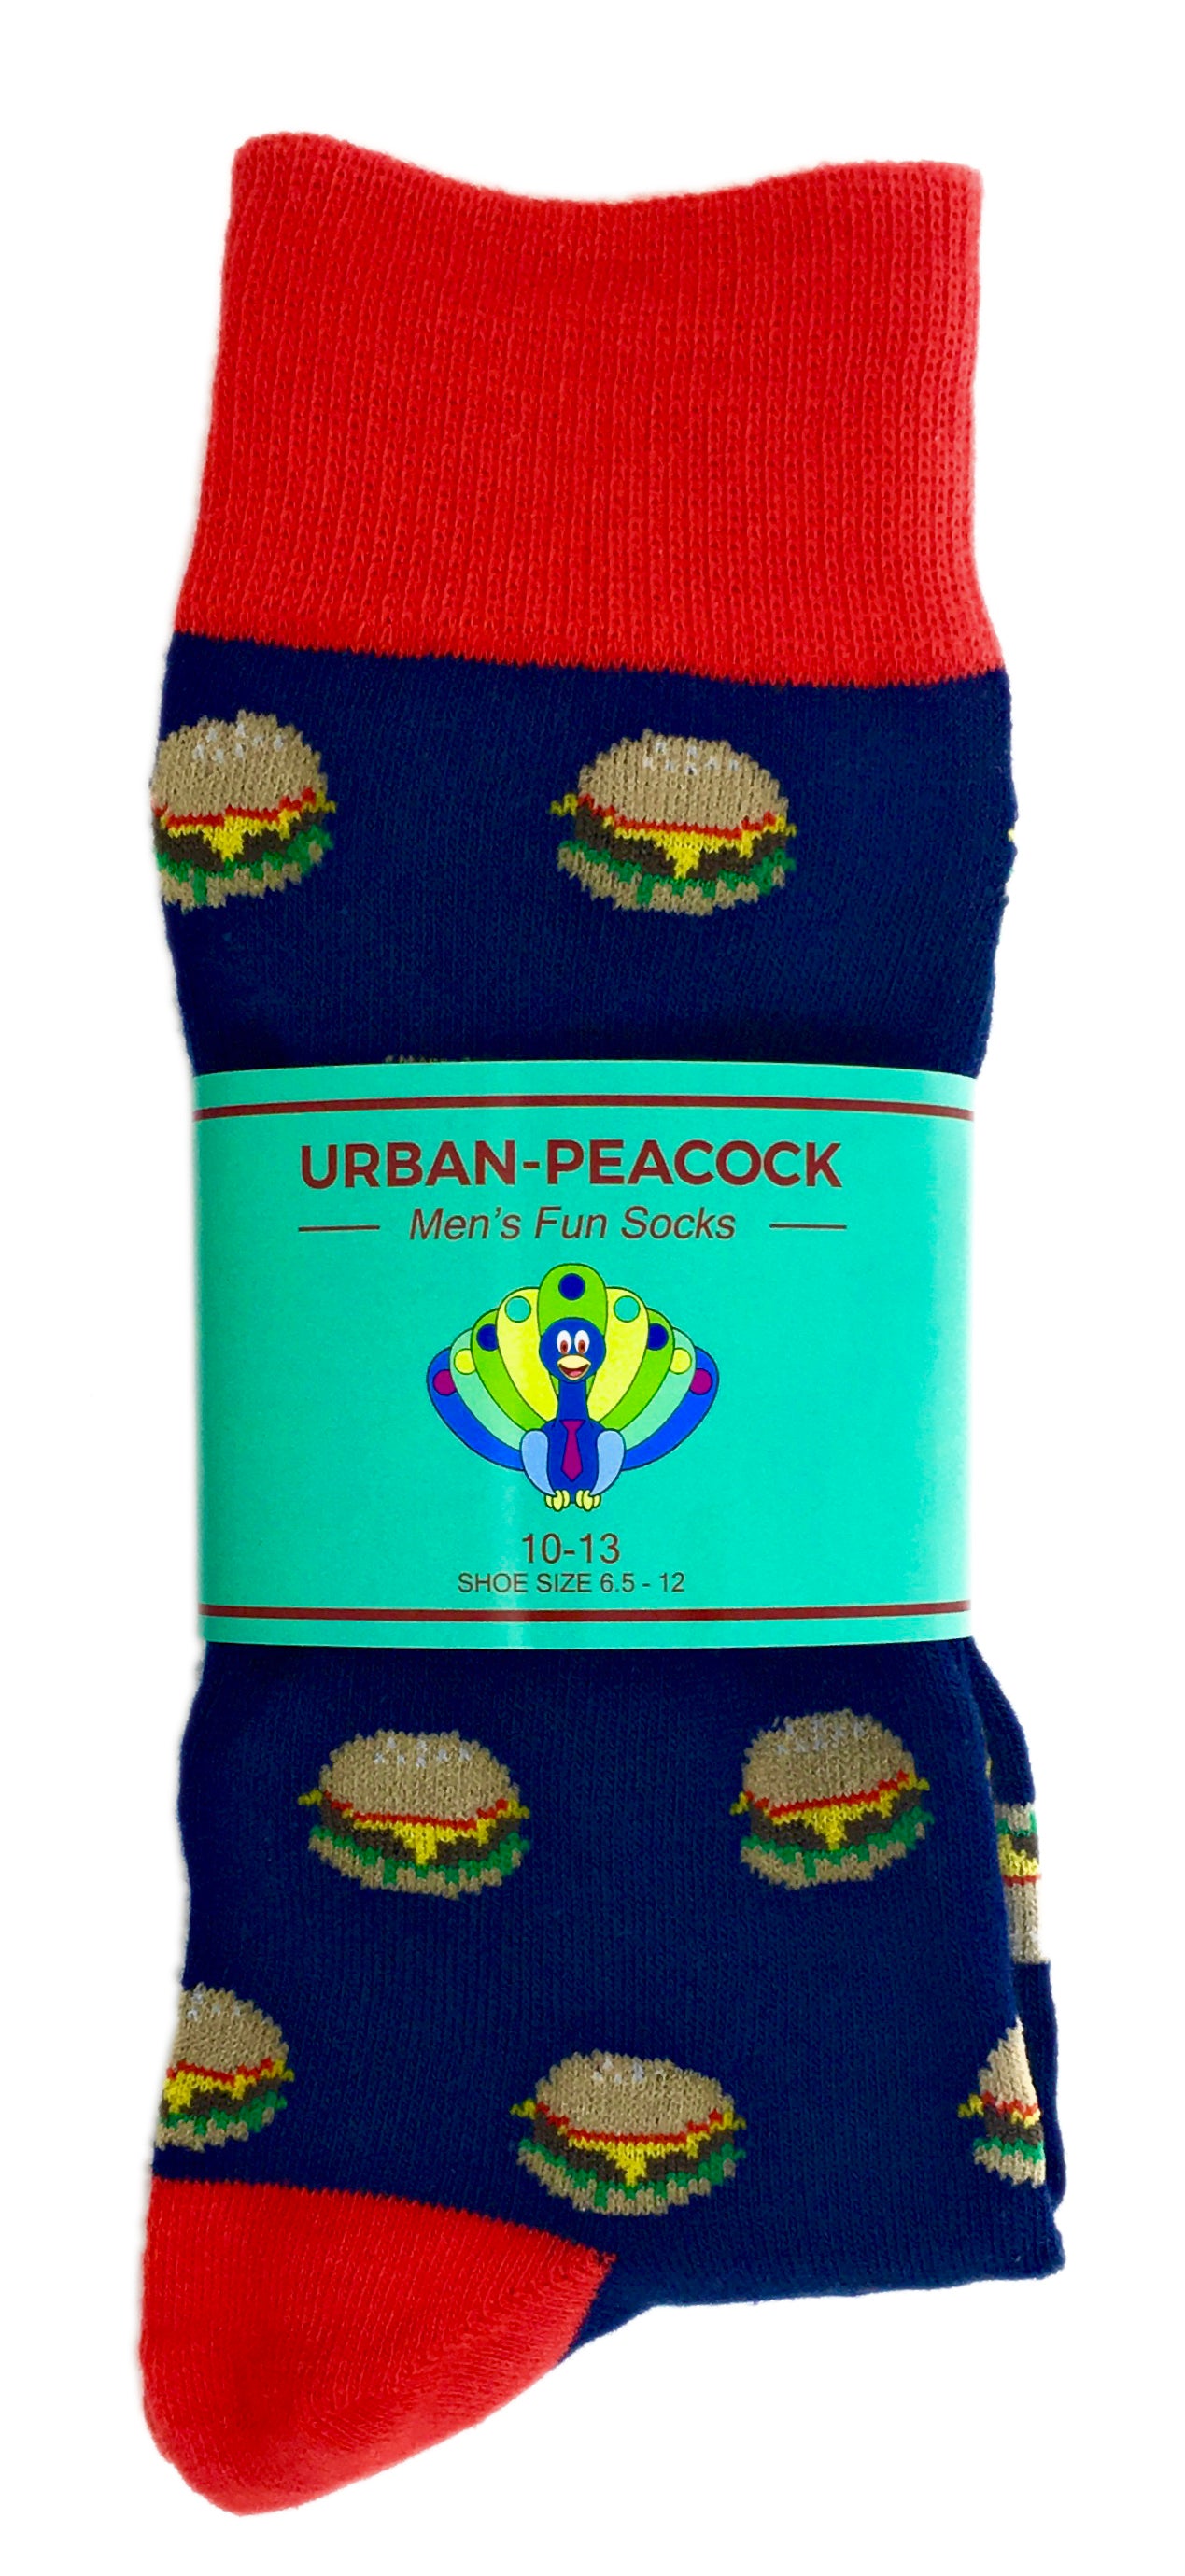 Men's Novelty Crew Socks - Cheeseburgers - Navy With Red